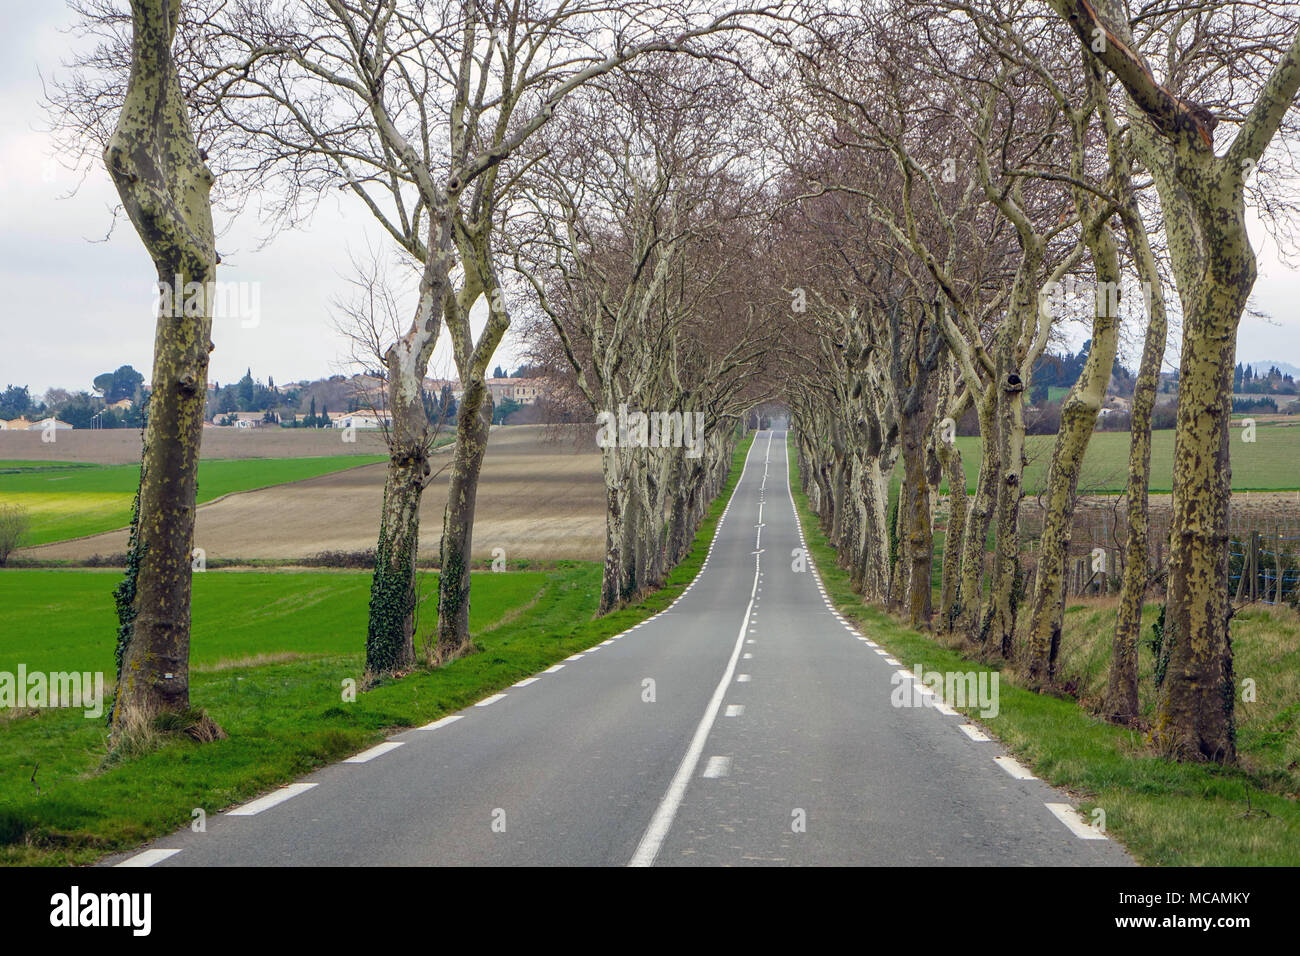 Avenue of Plane trees, beside road in Southern France Stock Photo